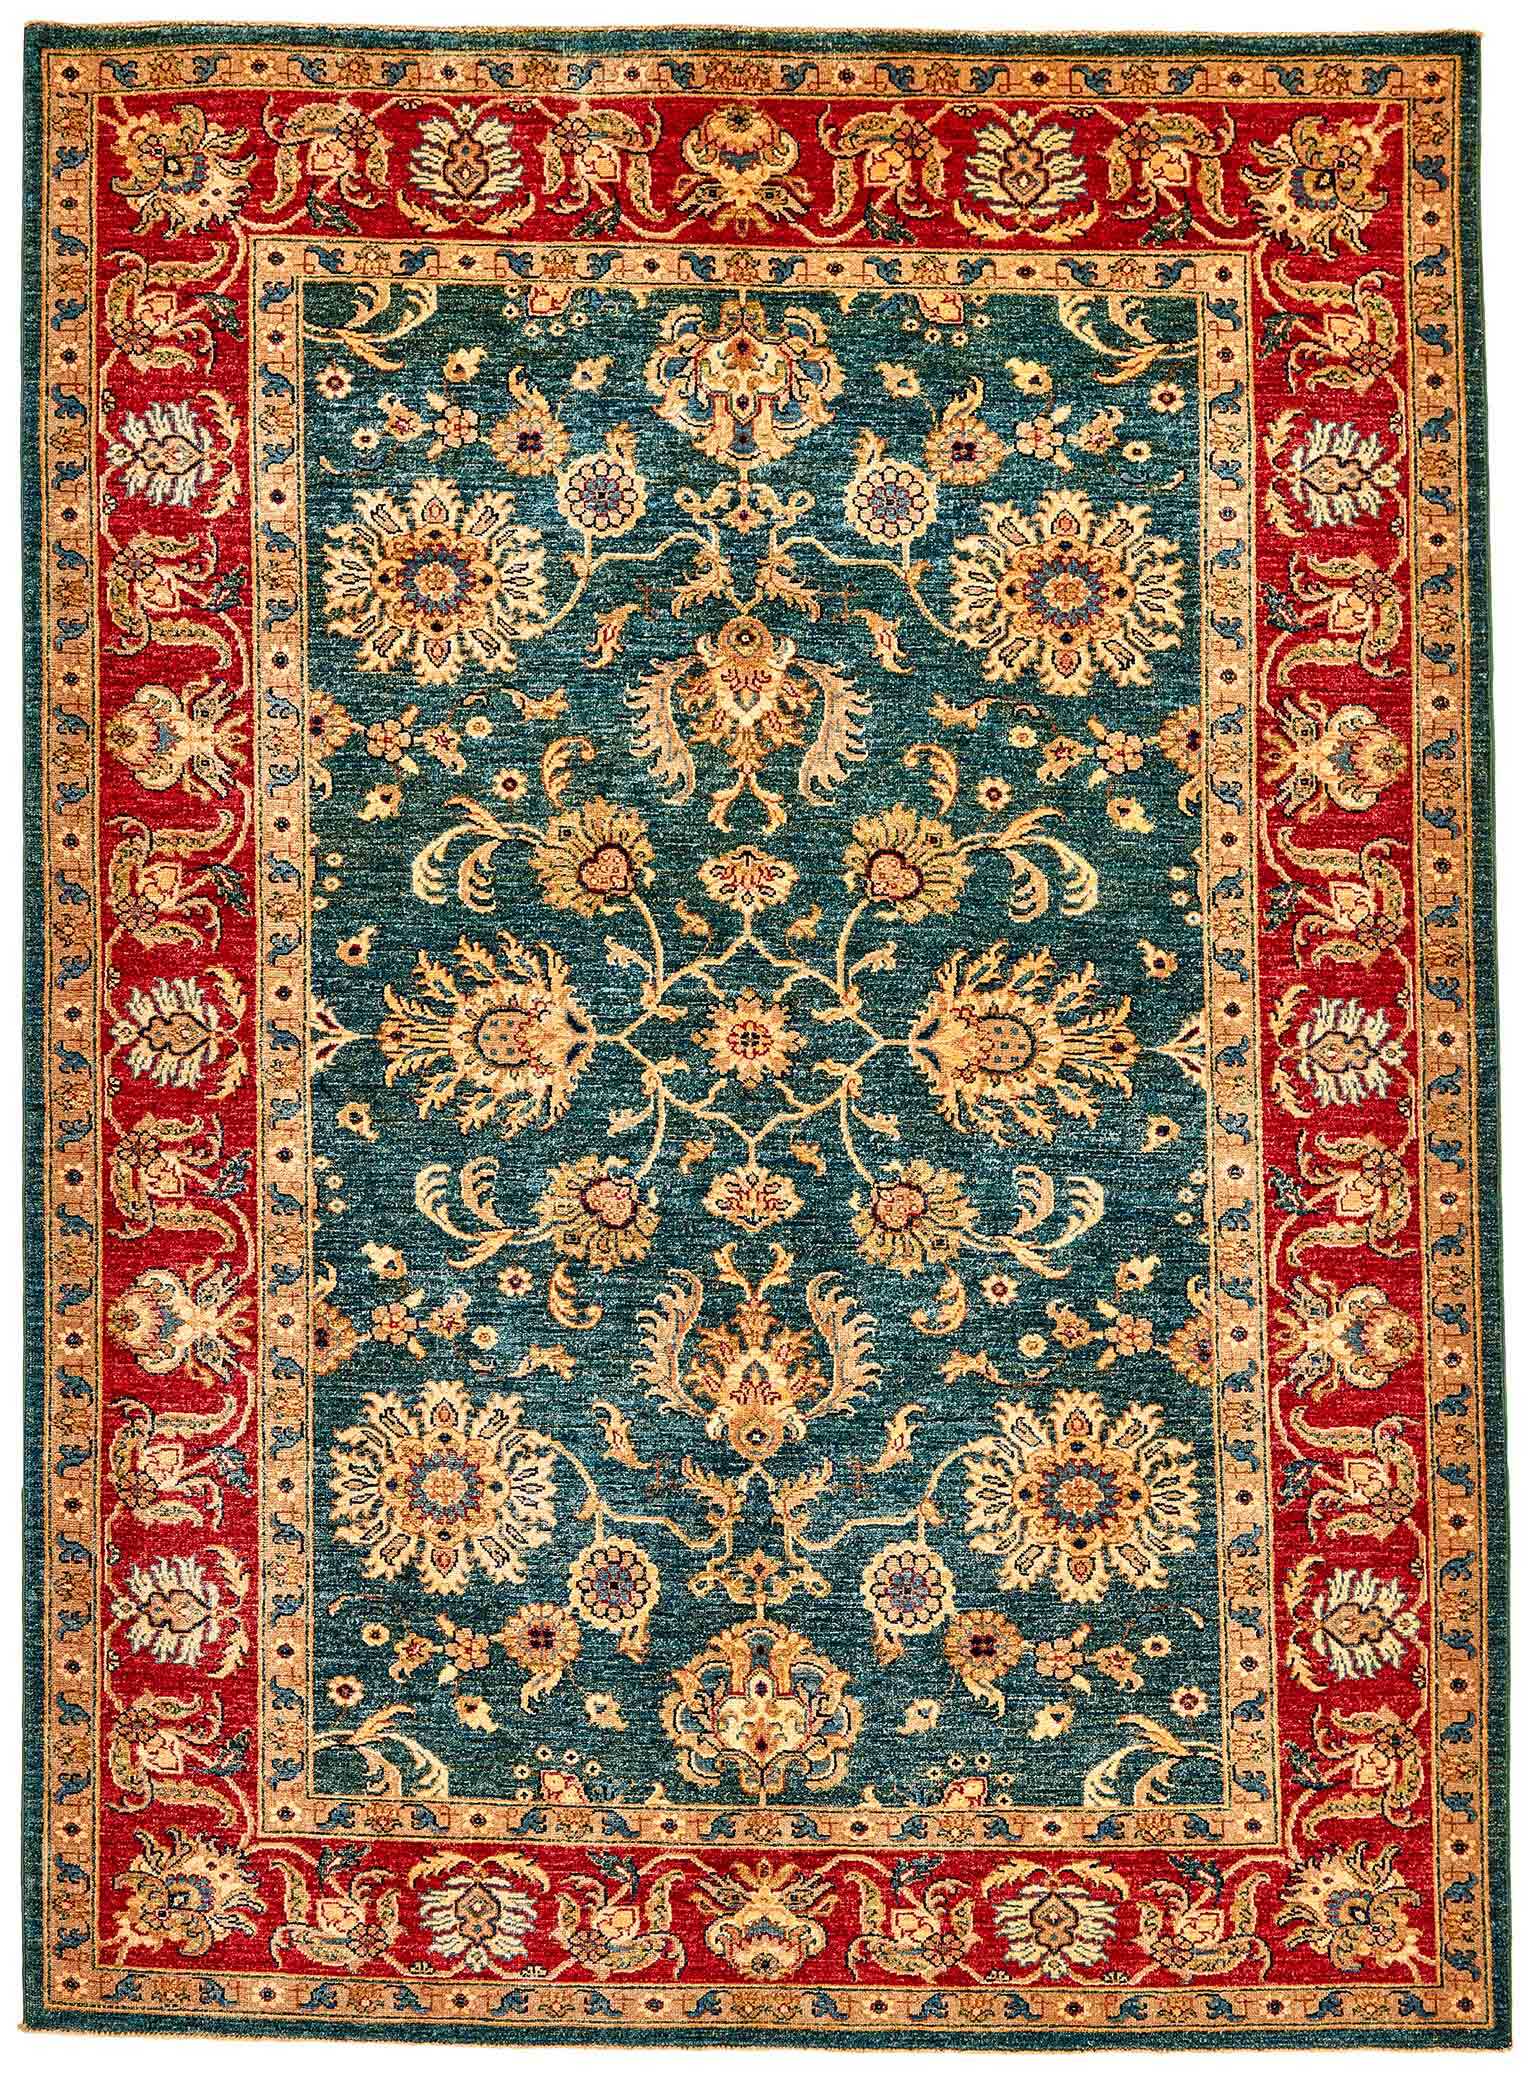 oriental rug with beige, blue and red floral pattern